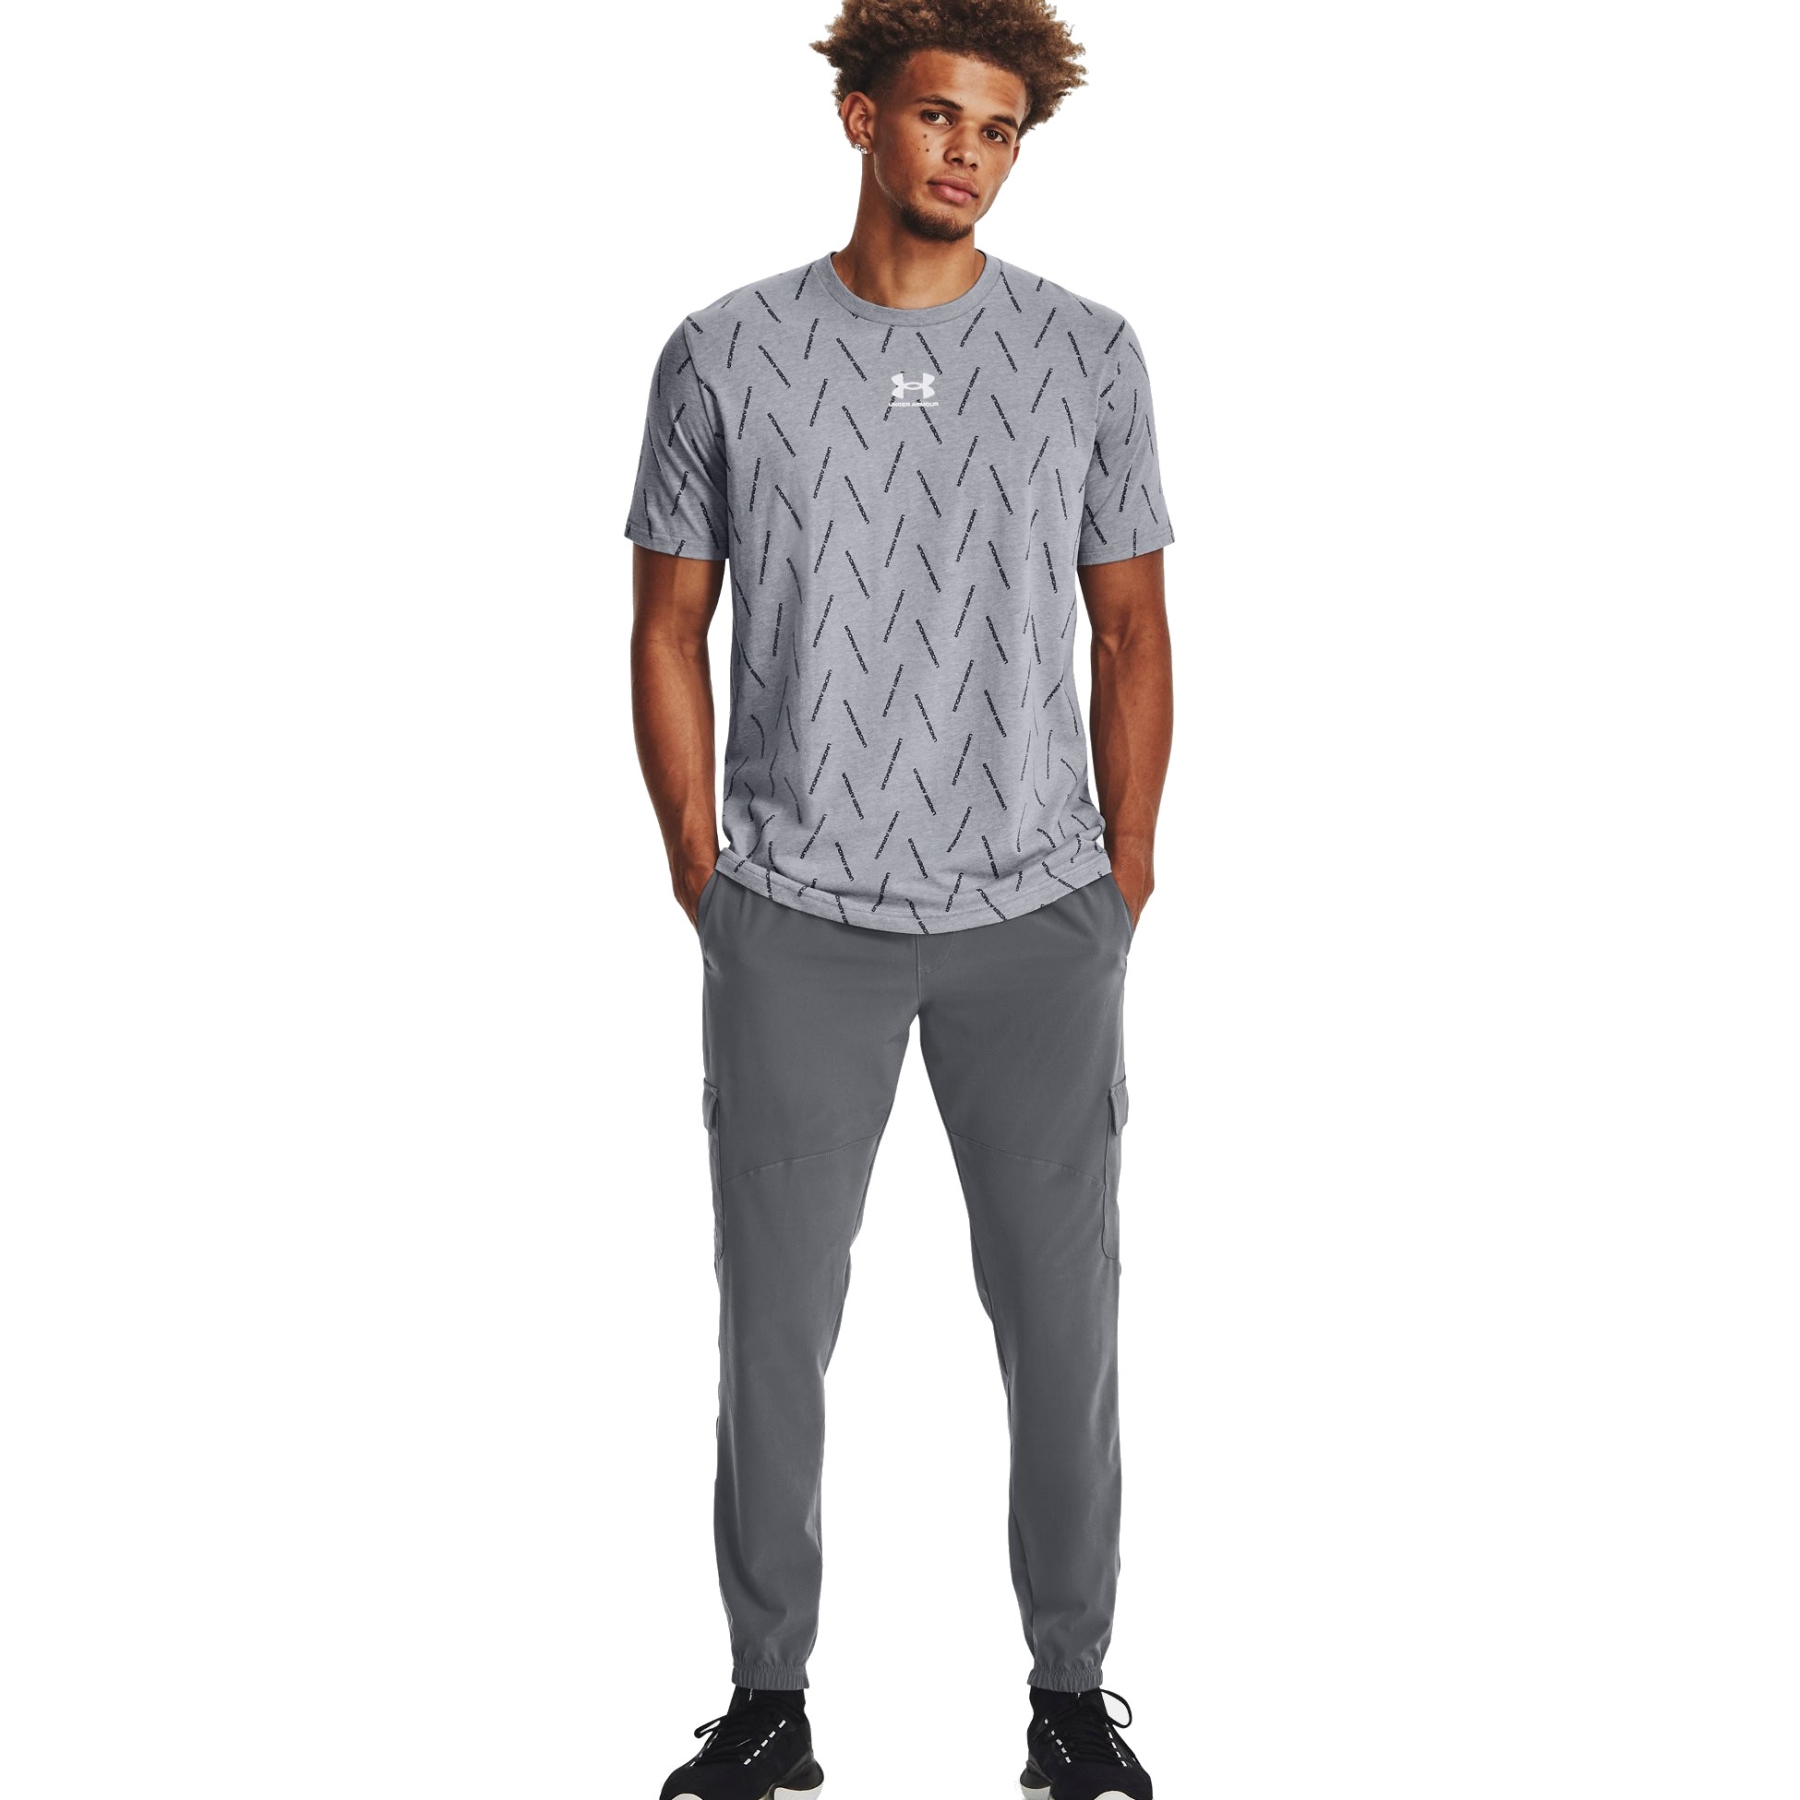 Under Armour Stretch Woven Cargo Pant